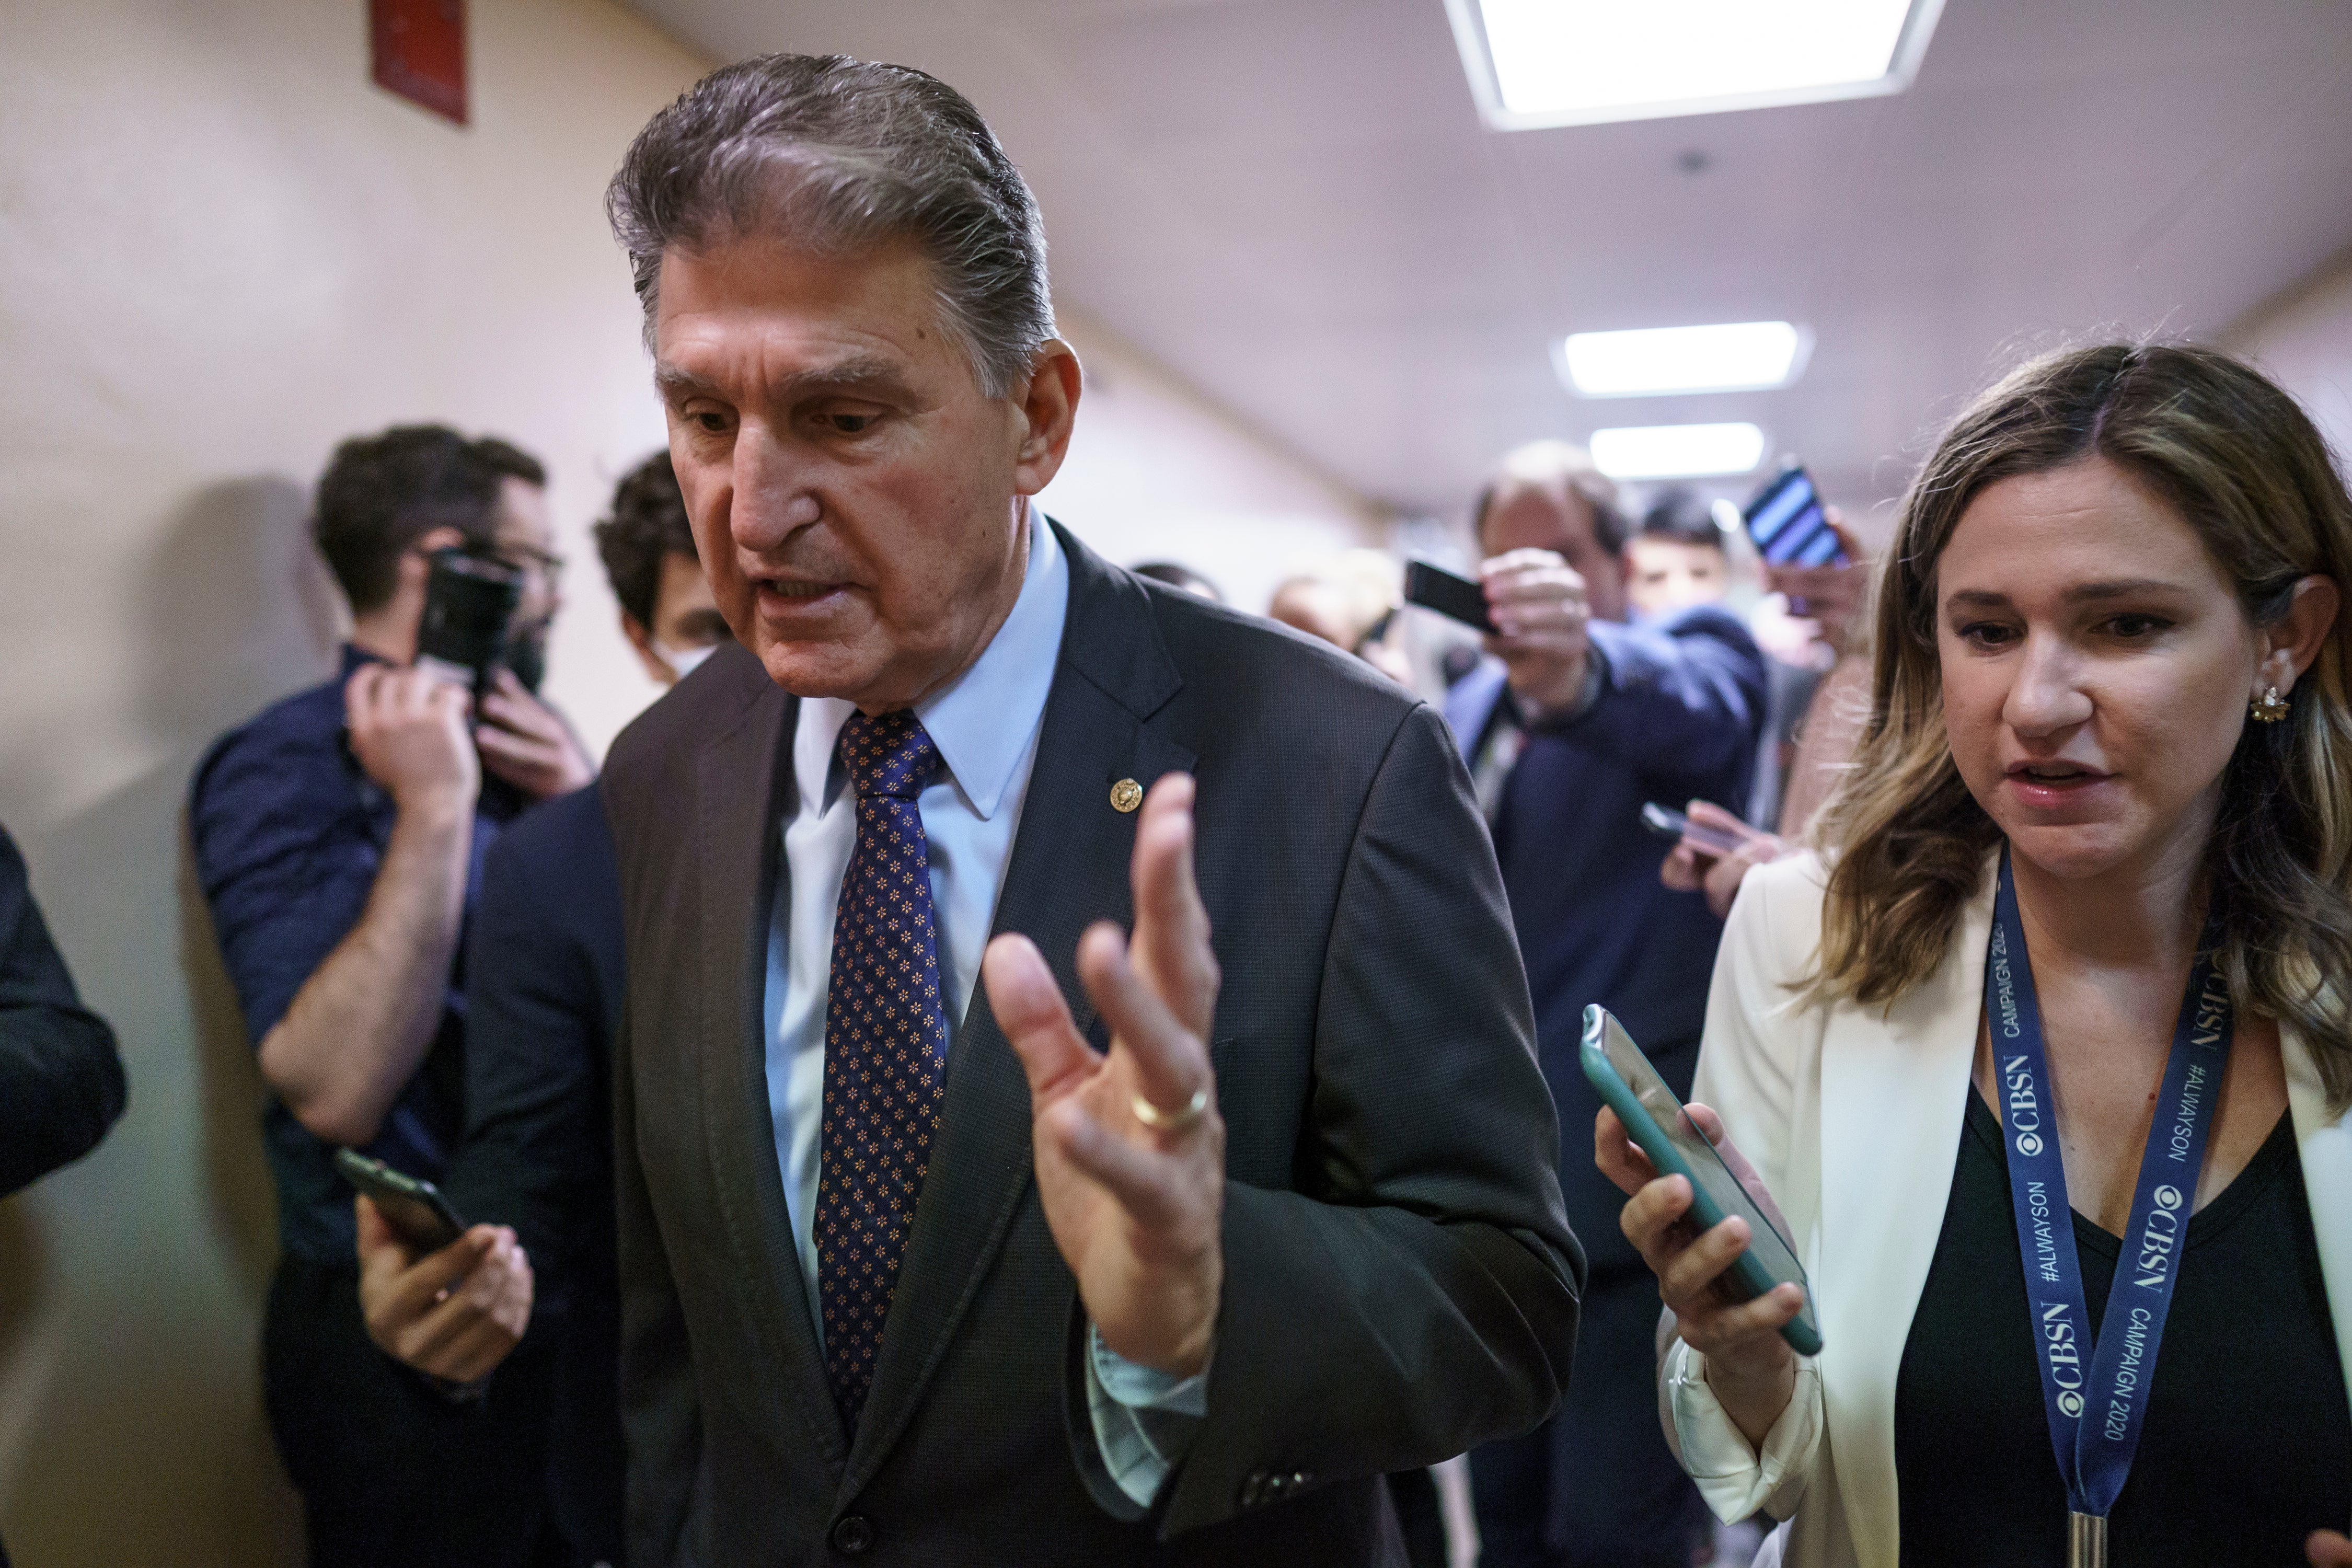 Joe Manchin has become a key figure in the president’s efforts to get his agenda through the upper chamber